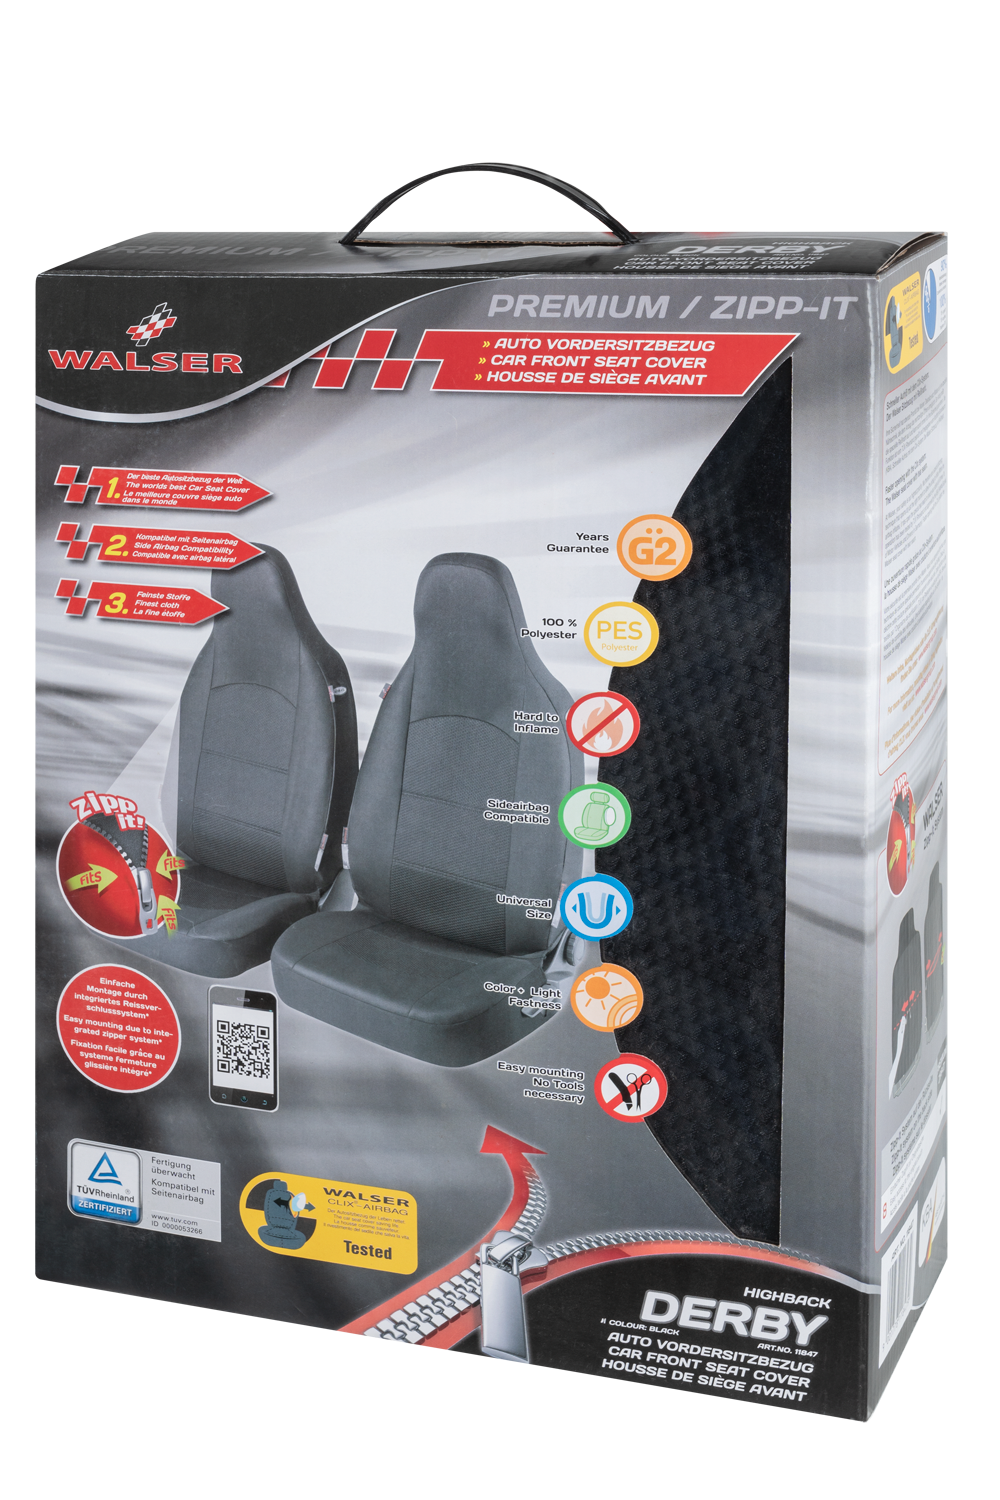 ZIPP IT Premium Derby Car Seat covers for highback front seats with zip system